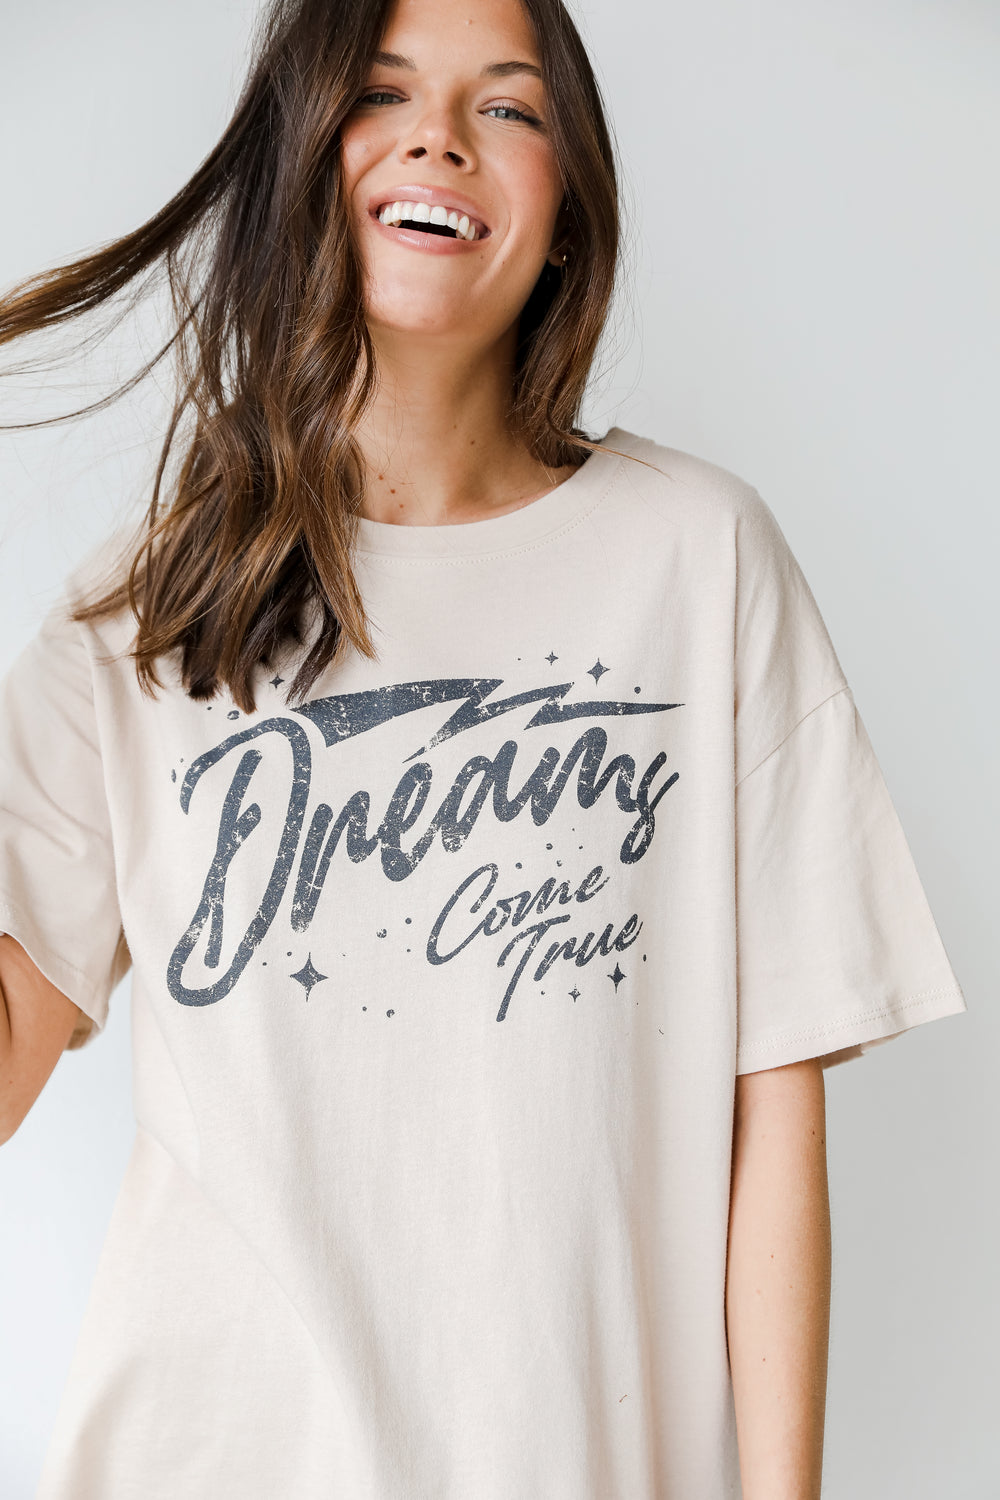 Dreams Come True Graphic Tee from dress up